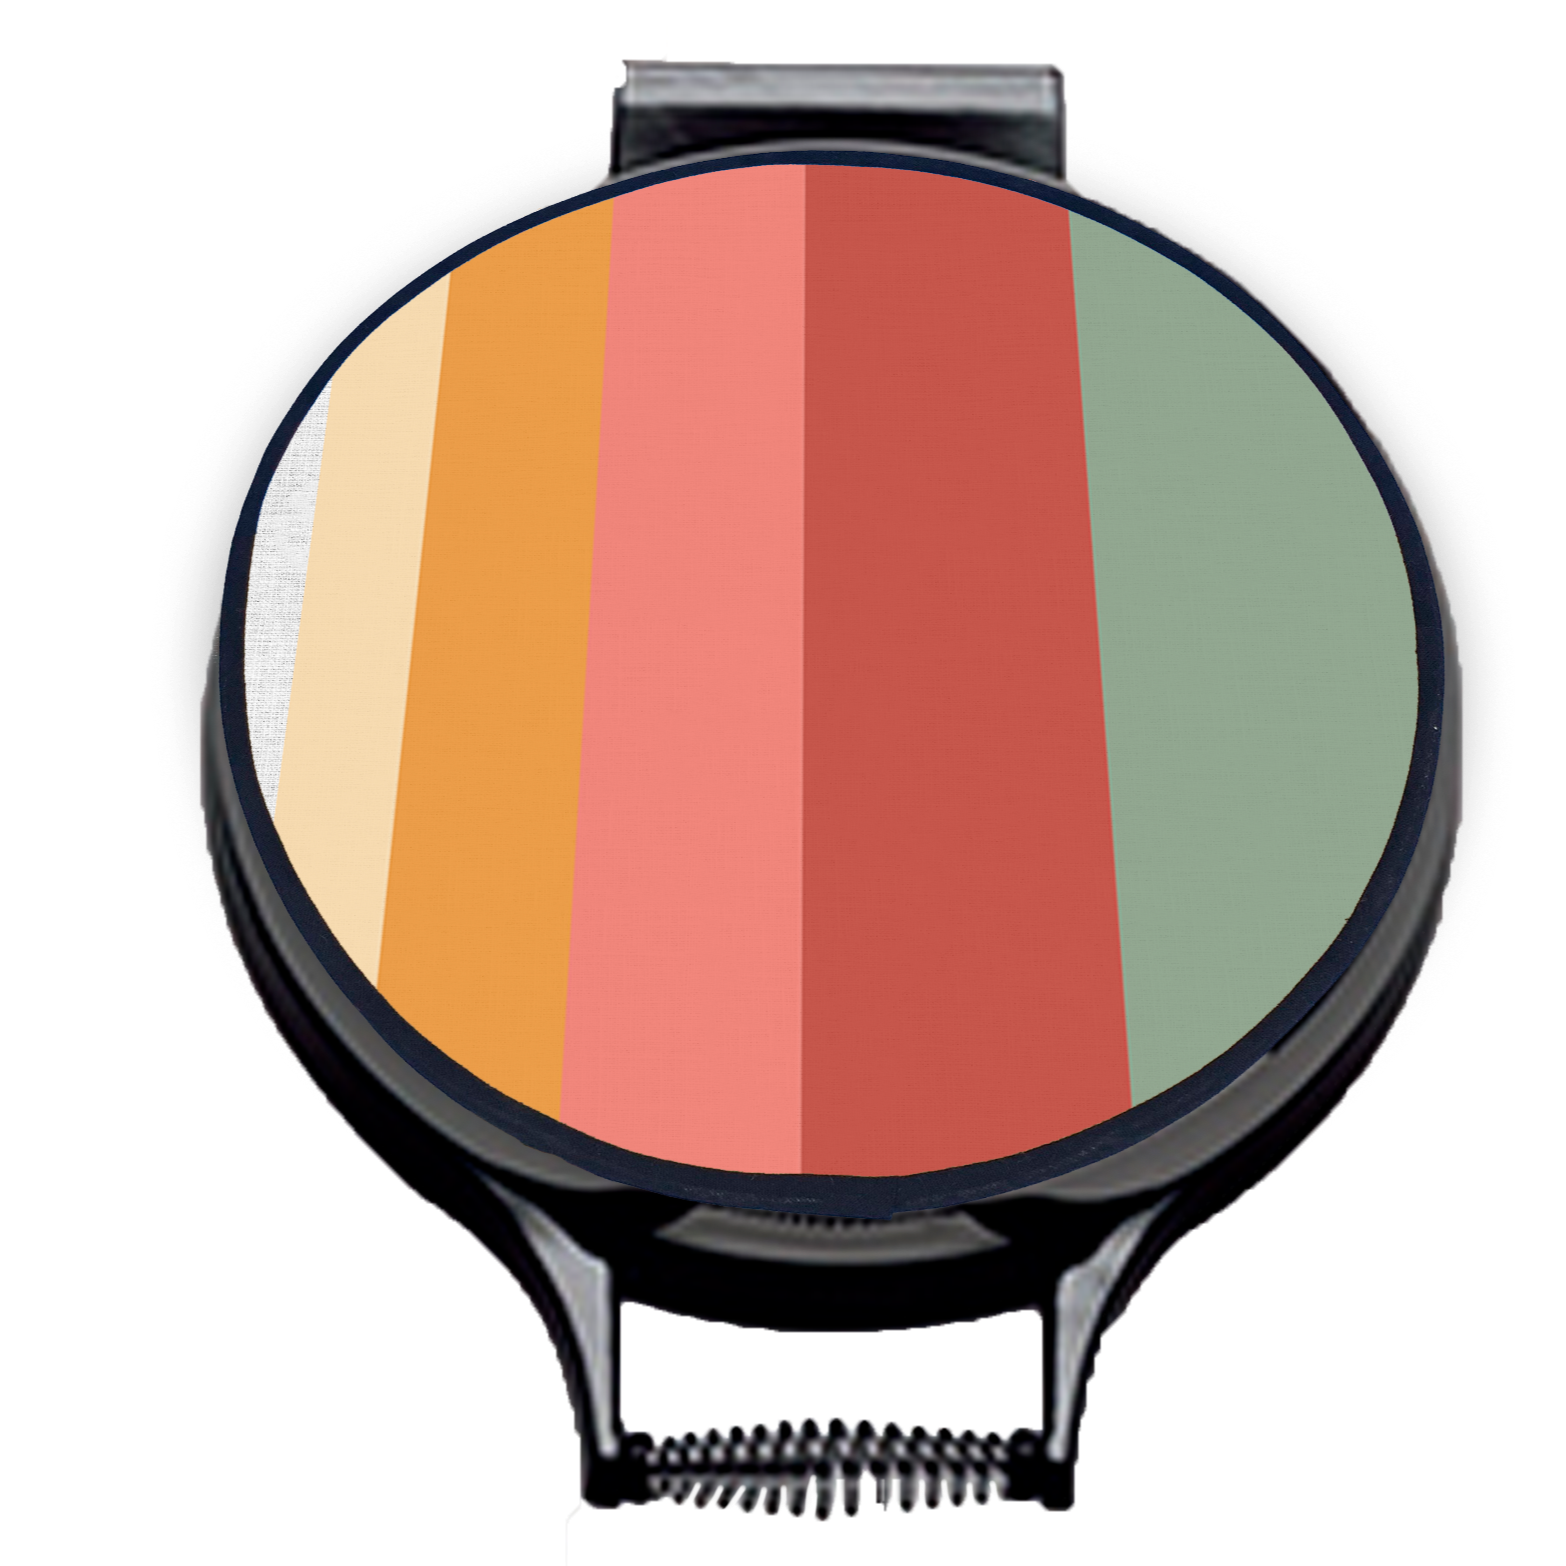 Stripes of green, red, pink and orange on beige linen circular hob cover with black hemming. Chef's hob cover. Pictured on metal cooker lid on an isolated background. Mustard and Gray